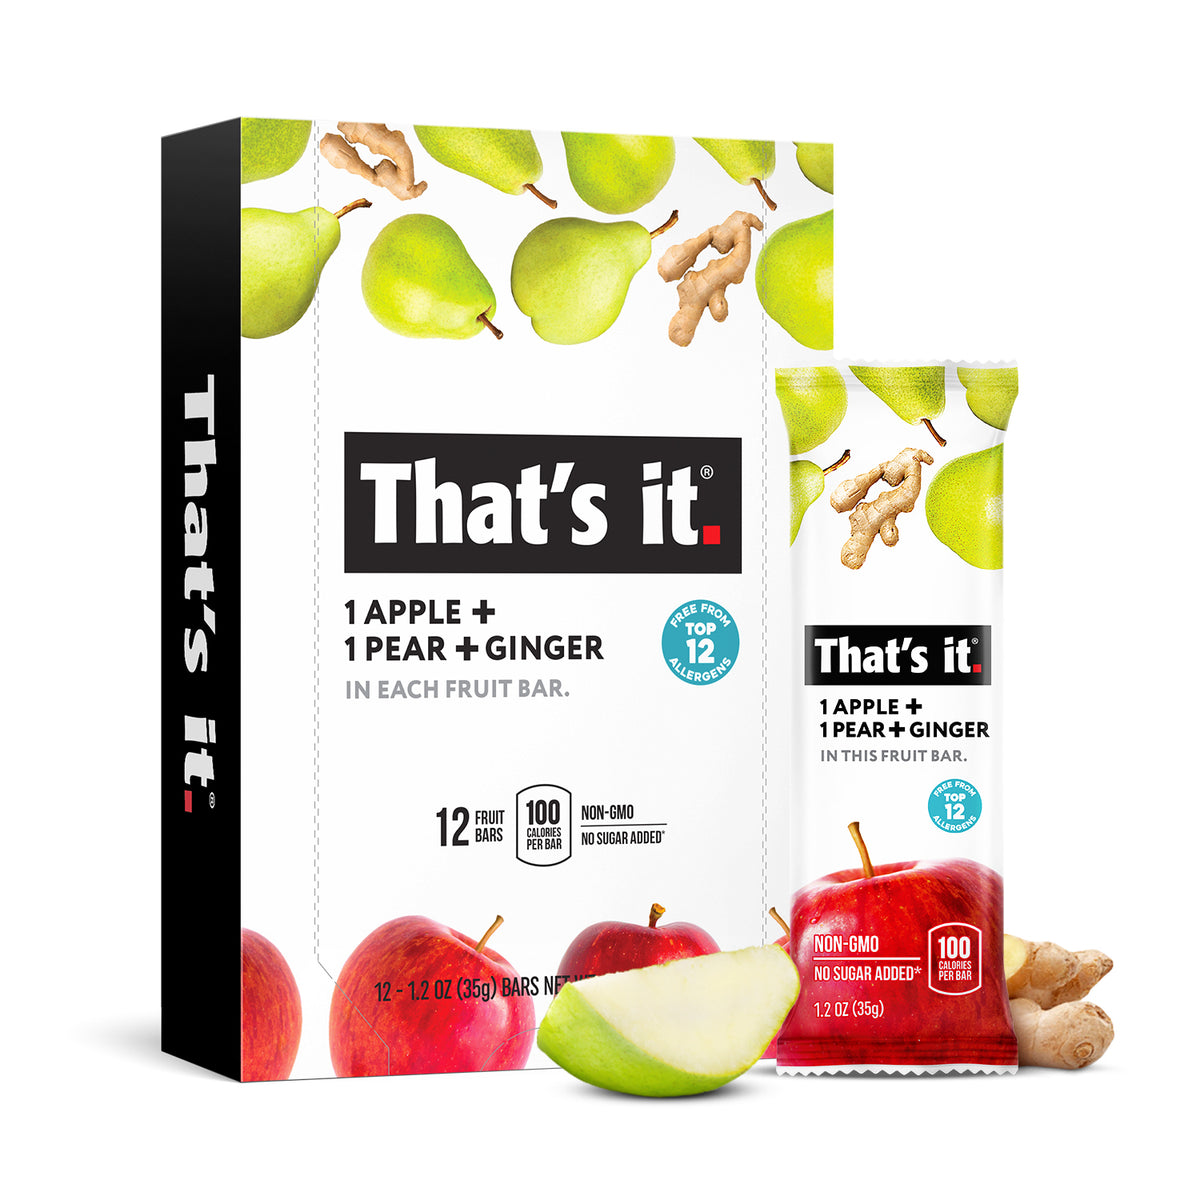 12 count box of Apple + Pear + Ginger plus single bar